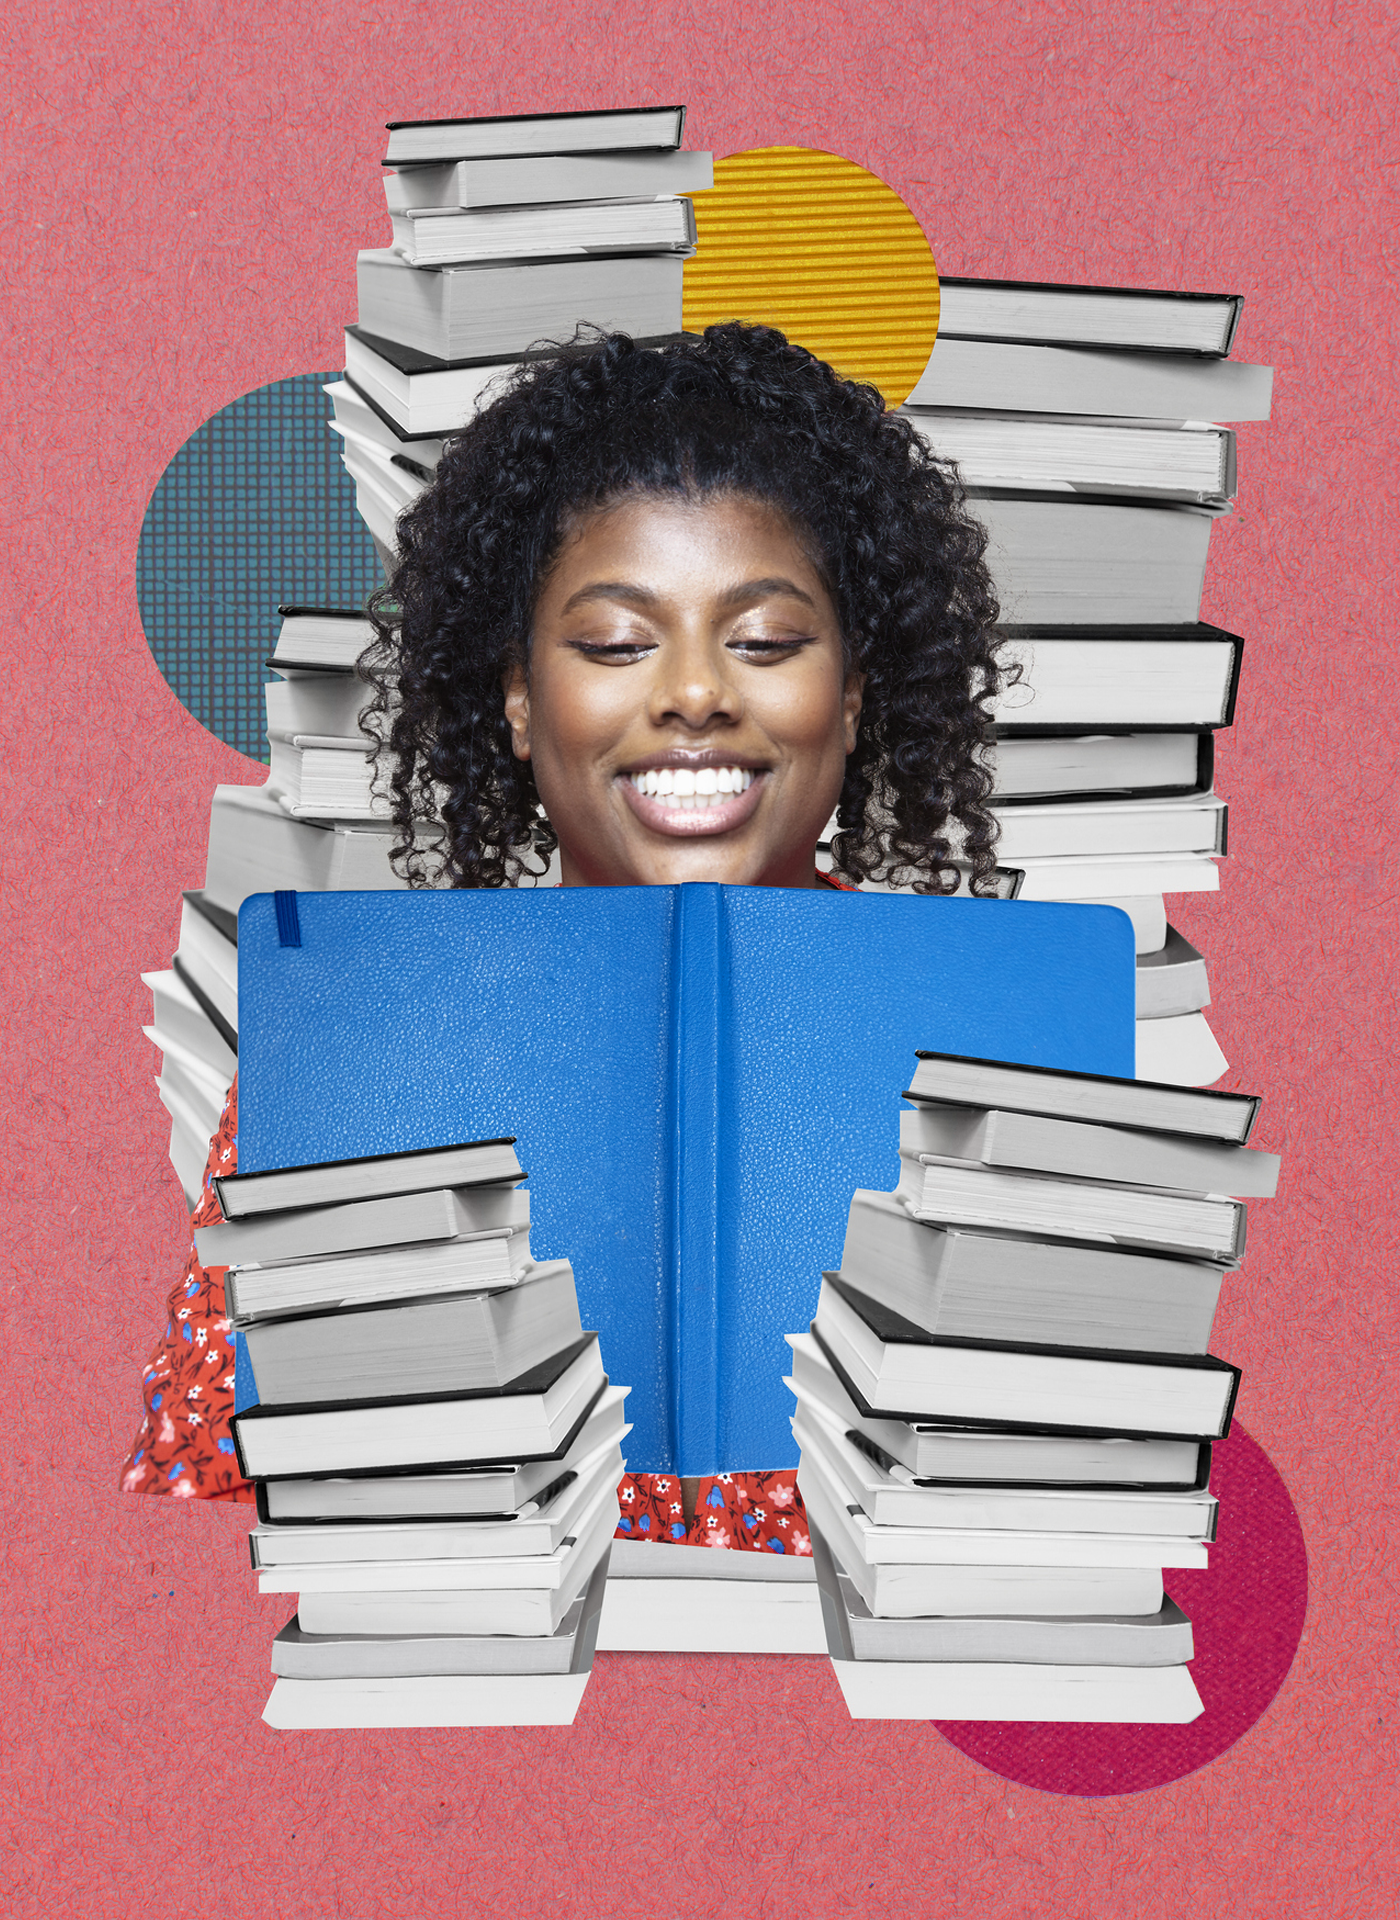 black woman smiling while reading a book in front of a stack of books